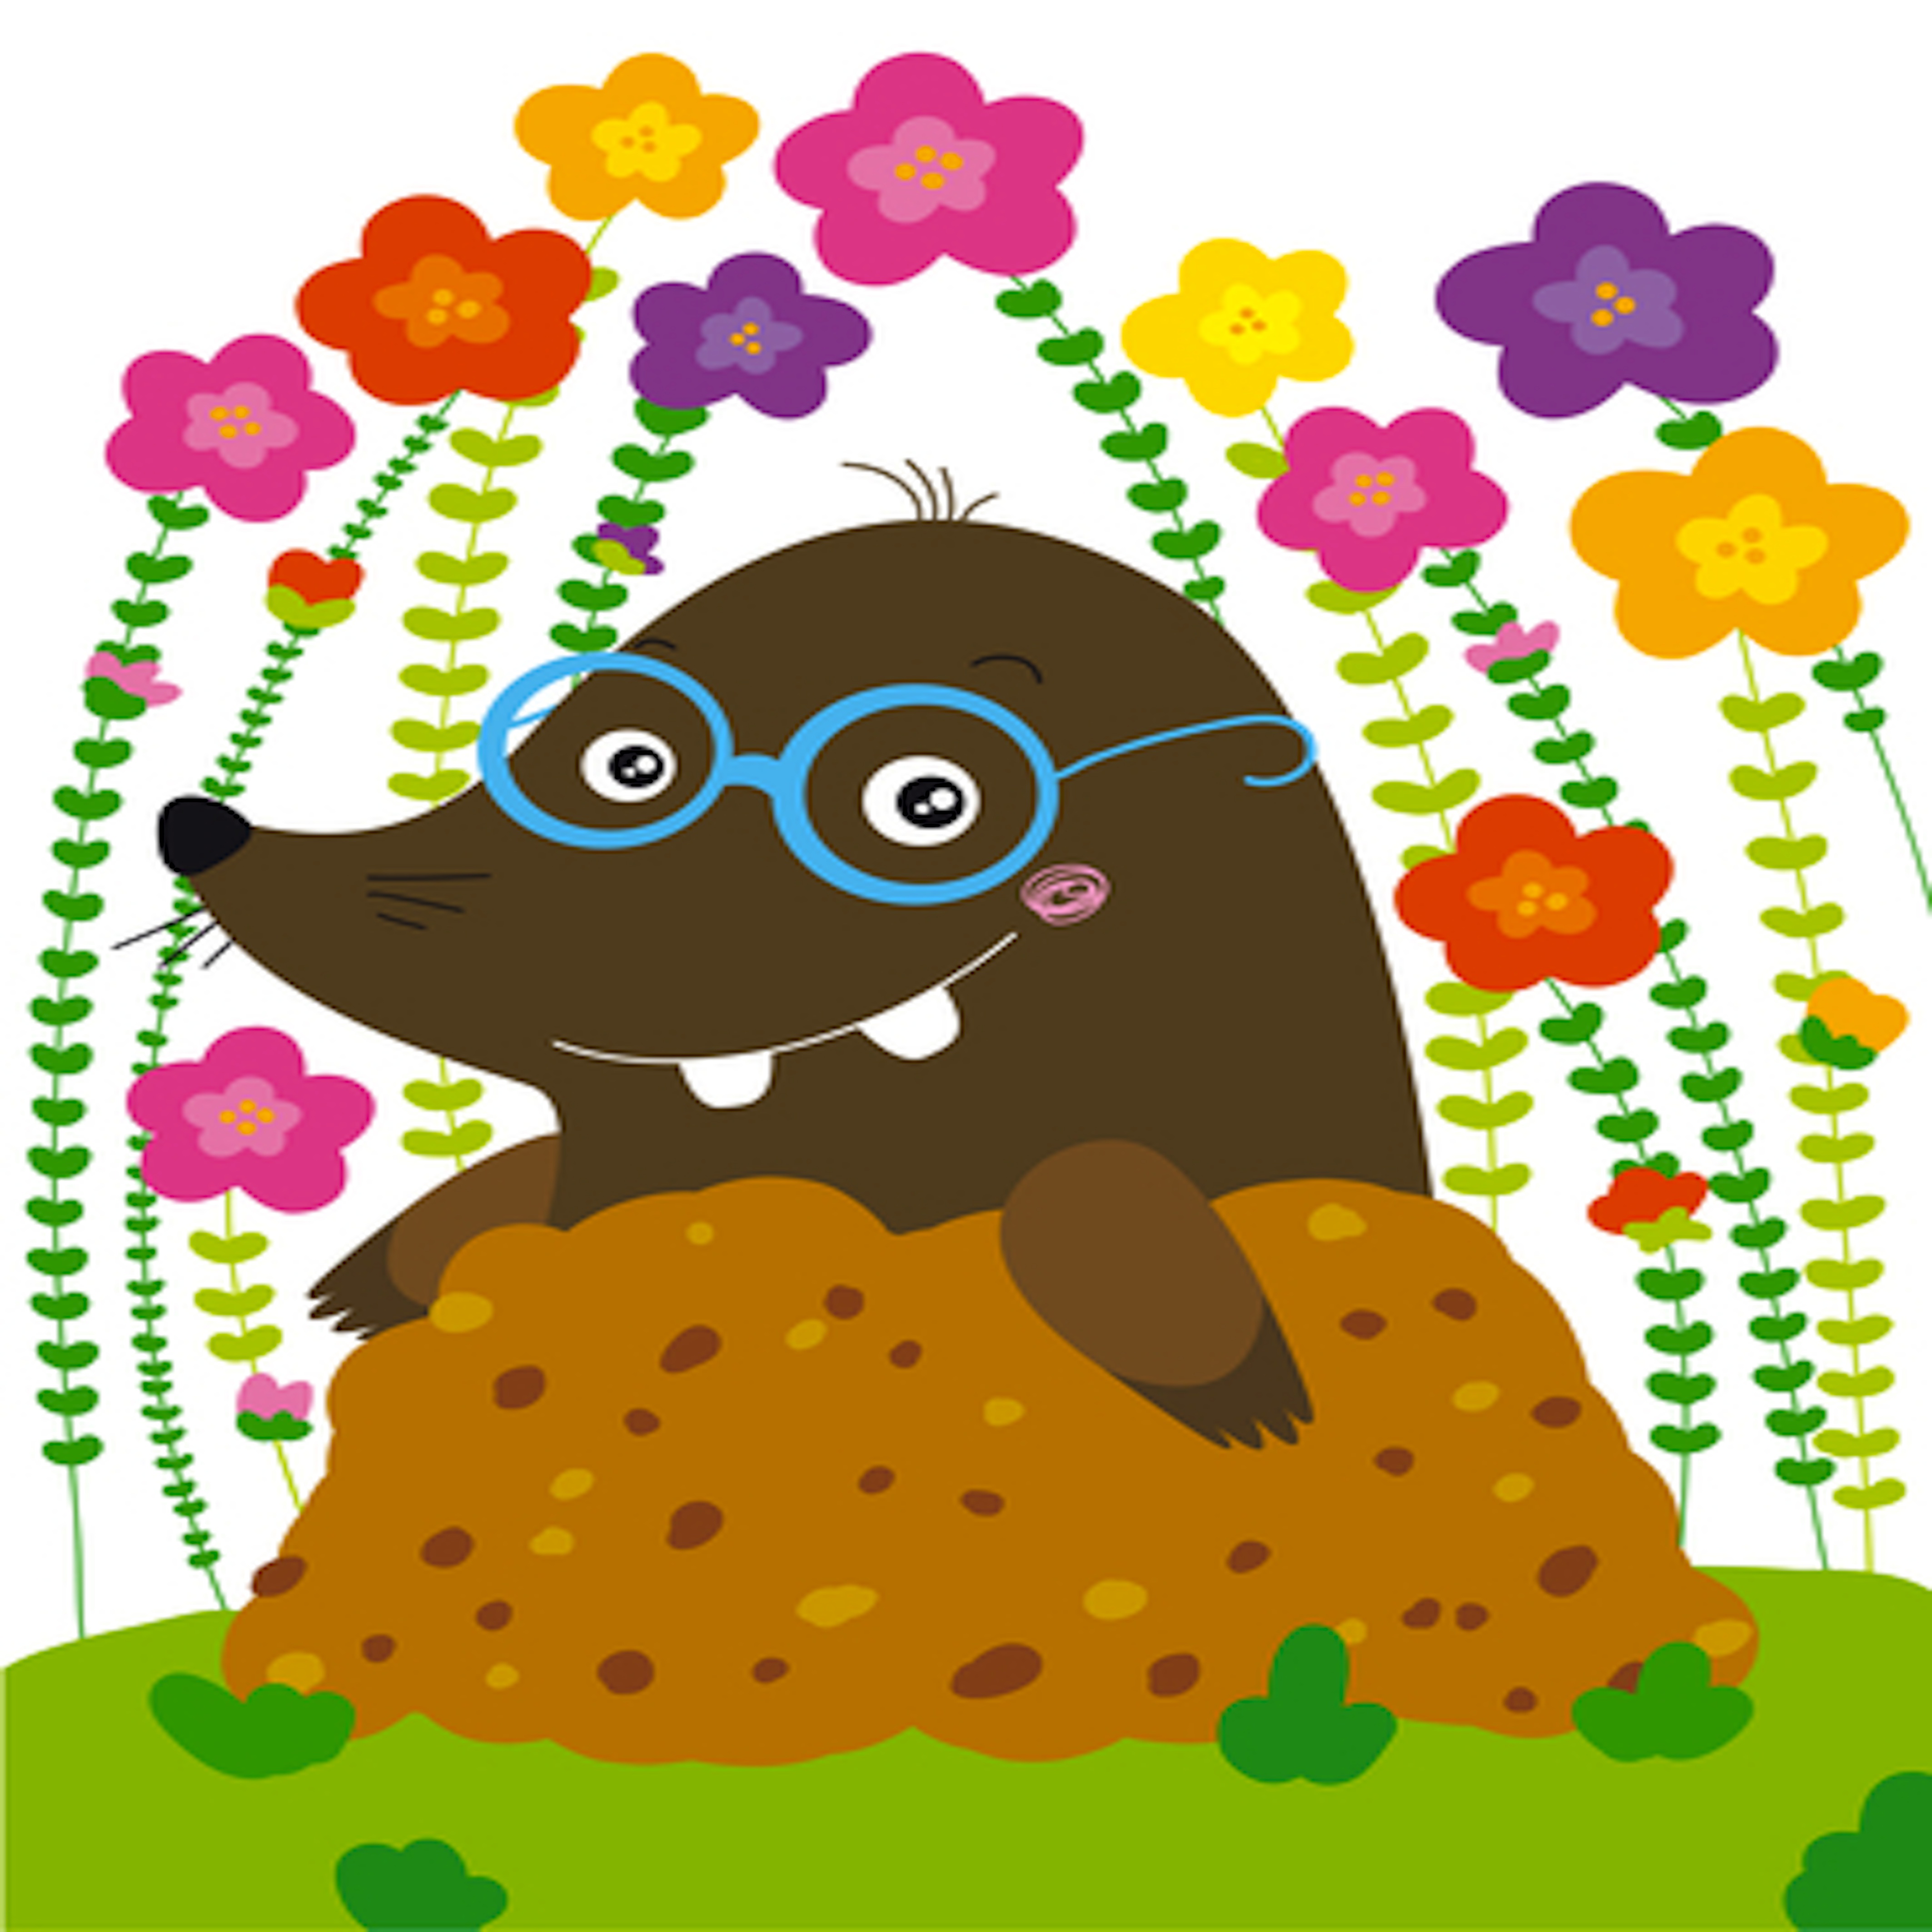 Mole Day with flower clipart free image.